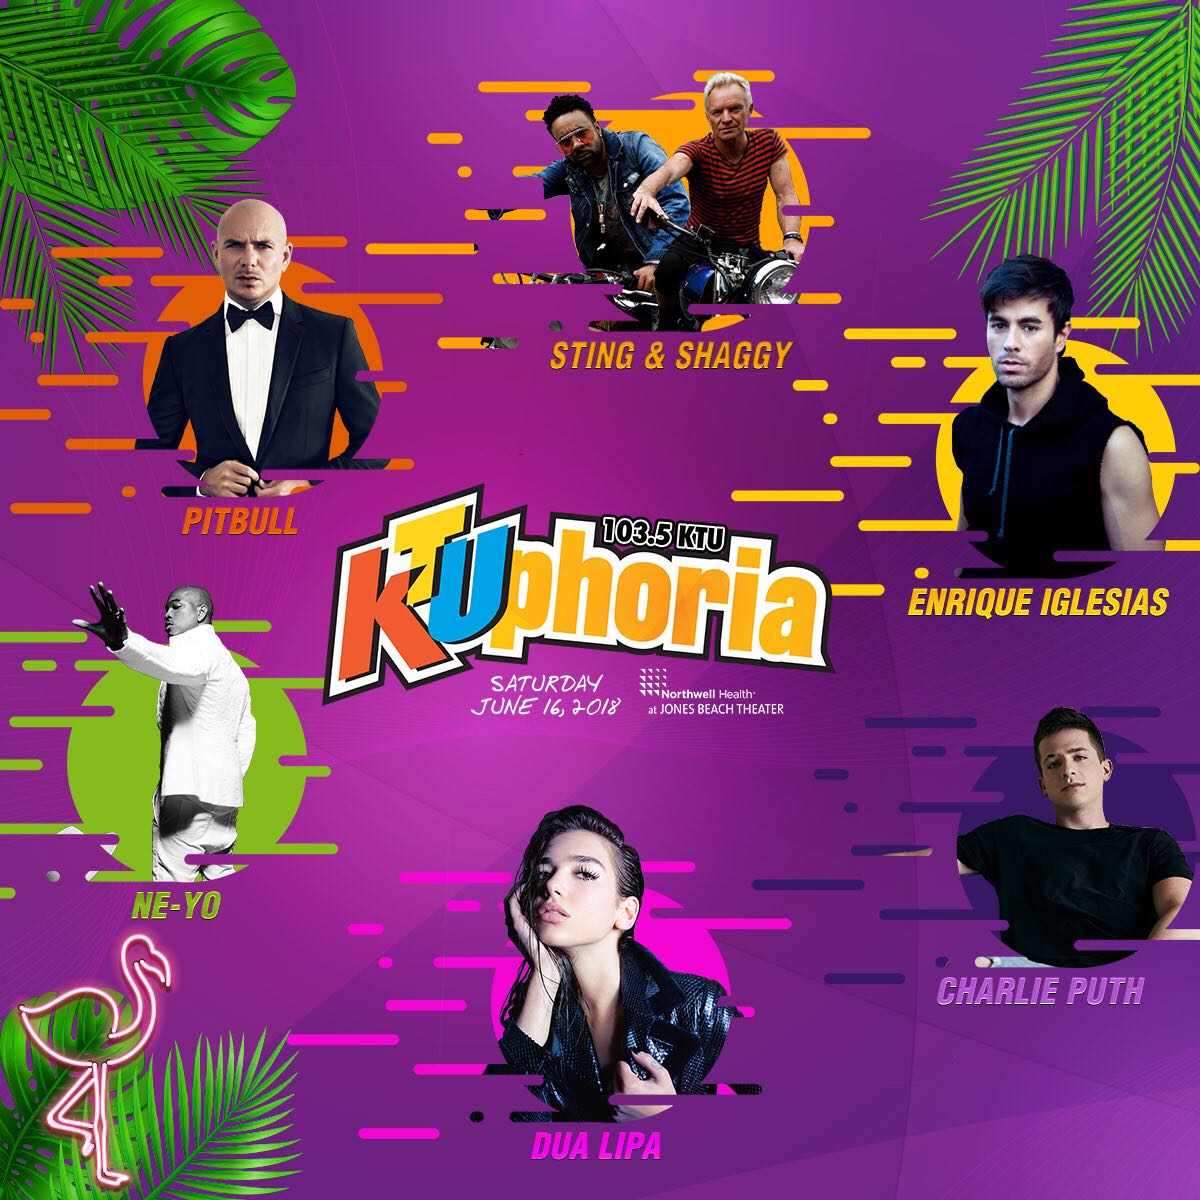 See you in June #KTUphoria. Tickets out now https://t.co/wjqtLuaxbf https://t.co/wQbxkhGk4s